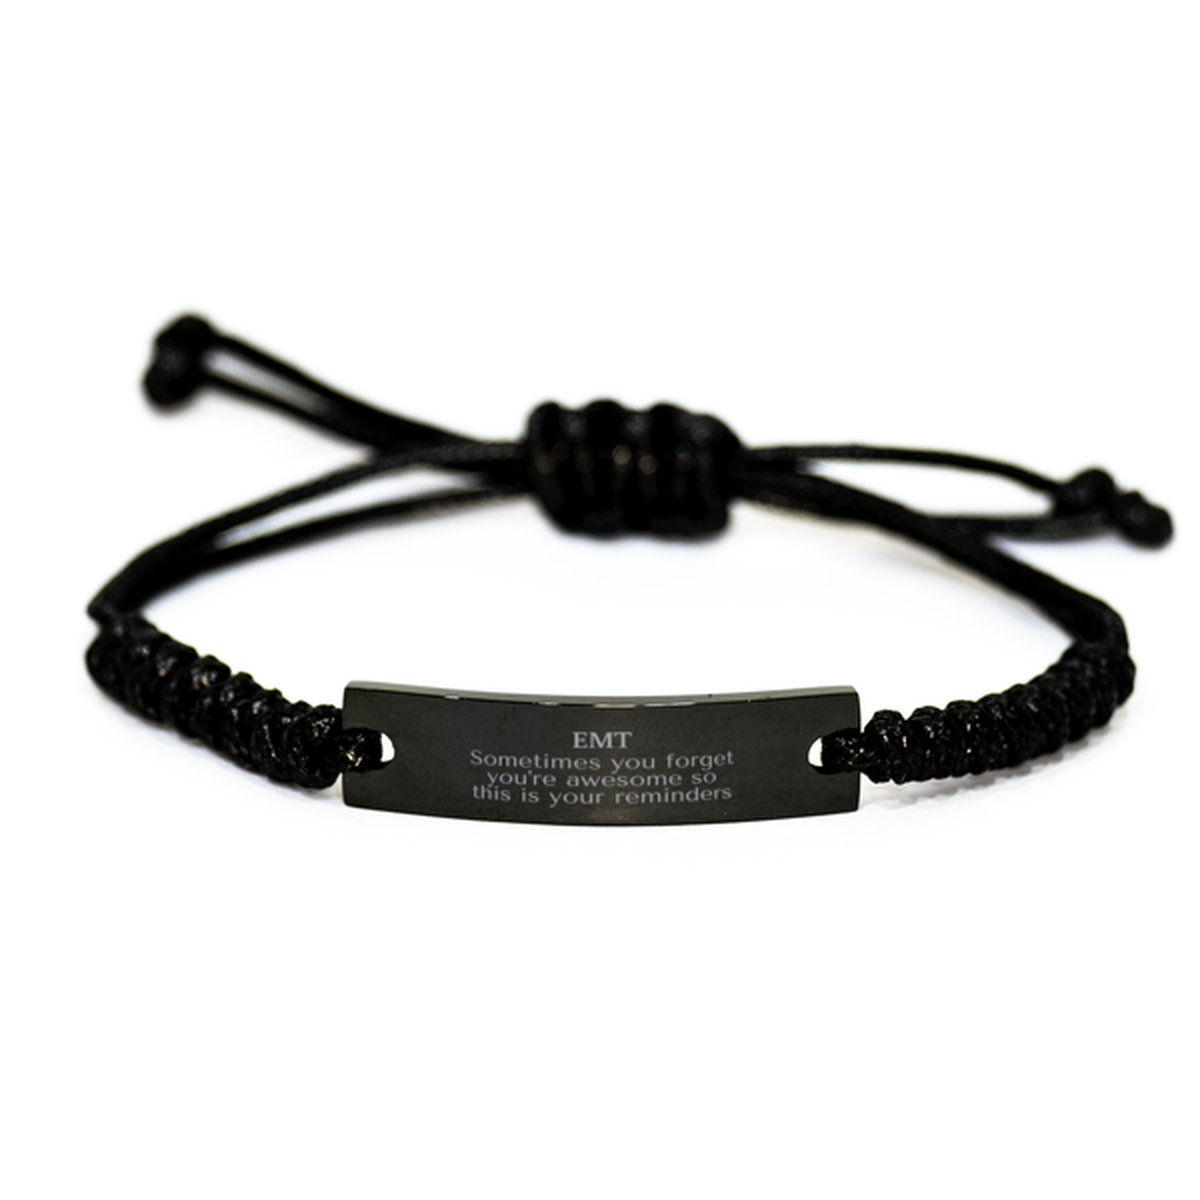 Sentimental EMT Black Rope Bracelet, EMT Sometimes you forget you're awesome so this is your reminders, Graduation Christmas Birthday Gifts for EMT, Men, Women, Coworkers